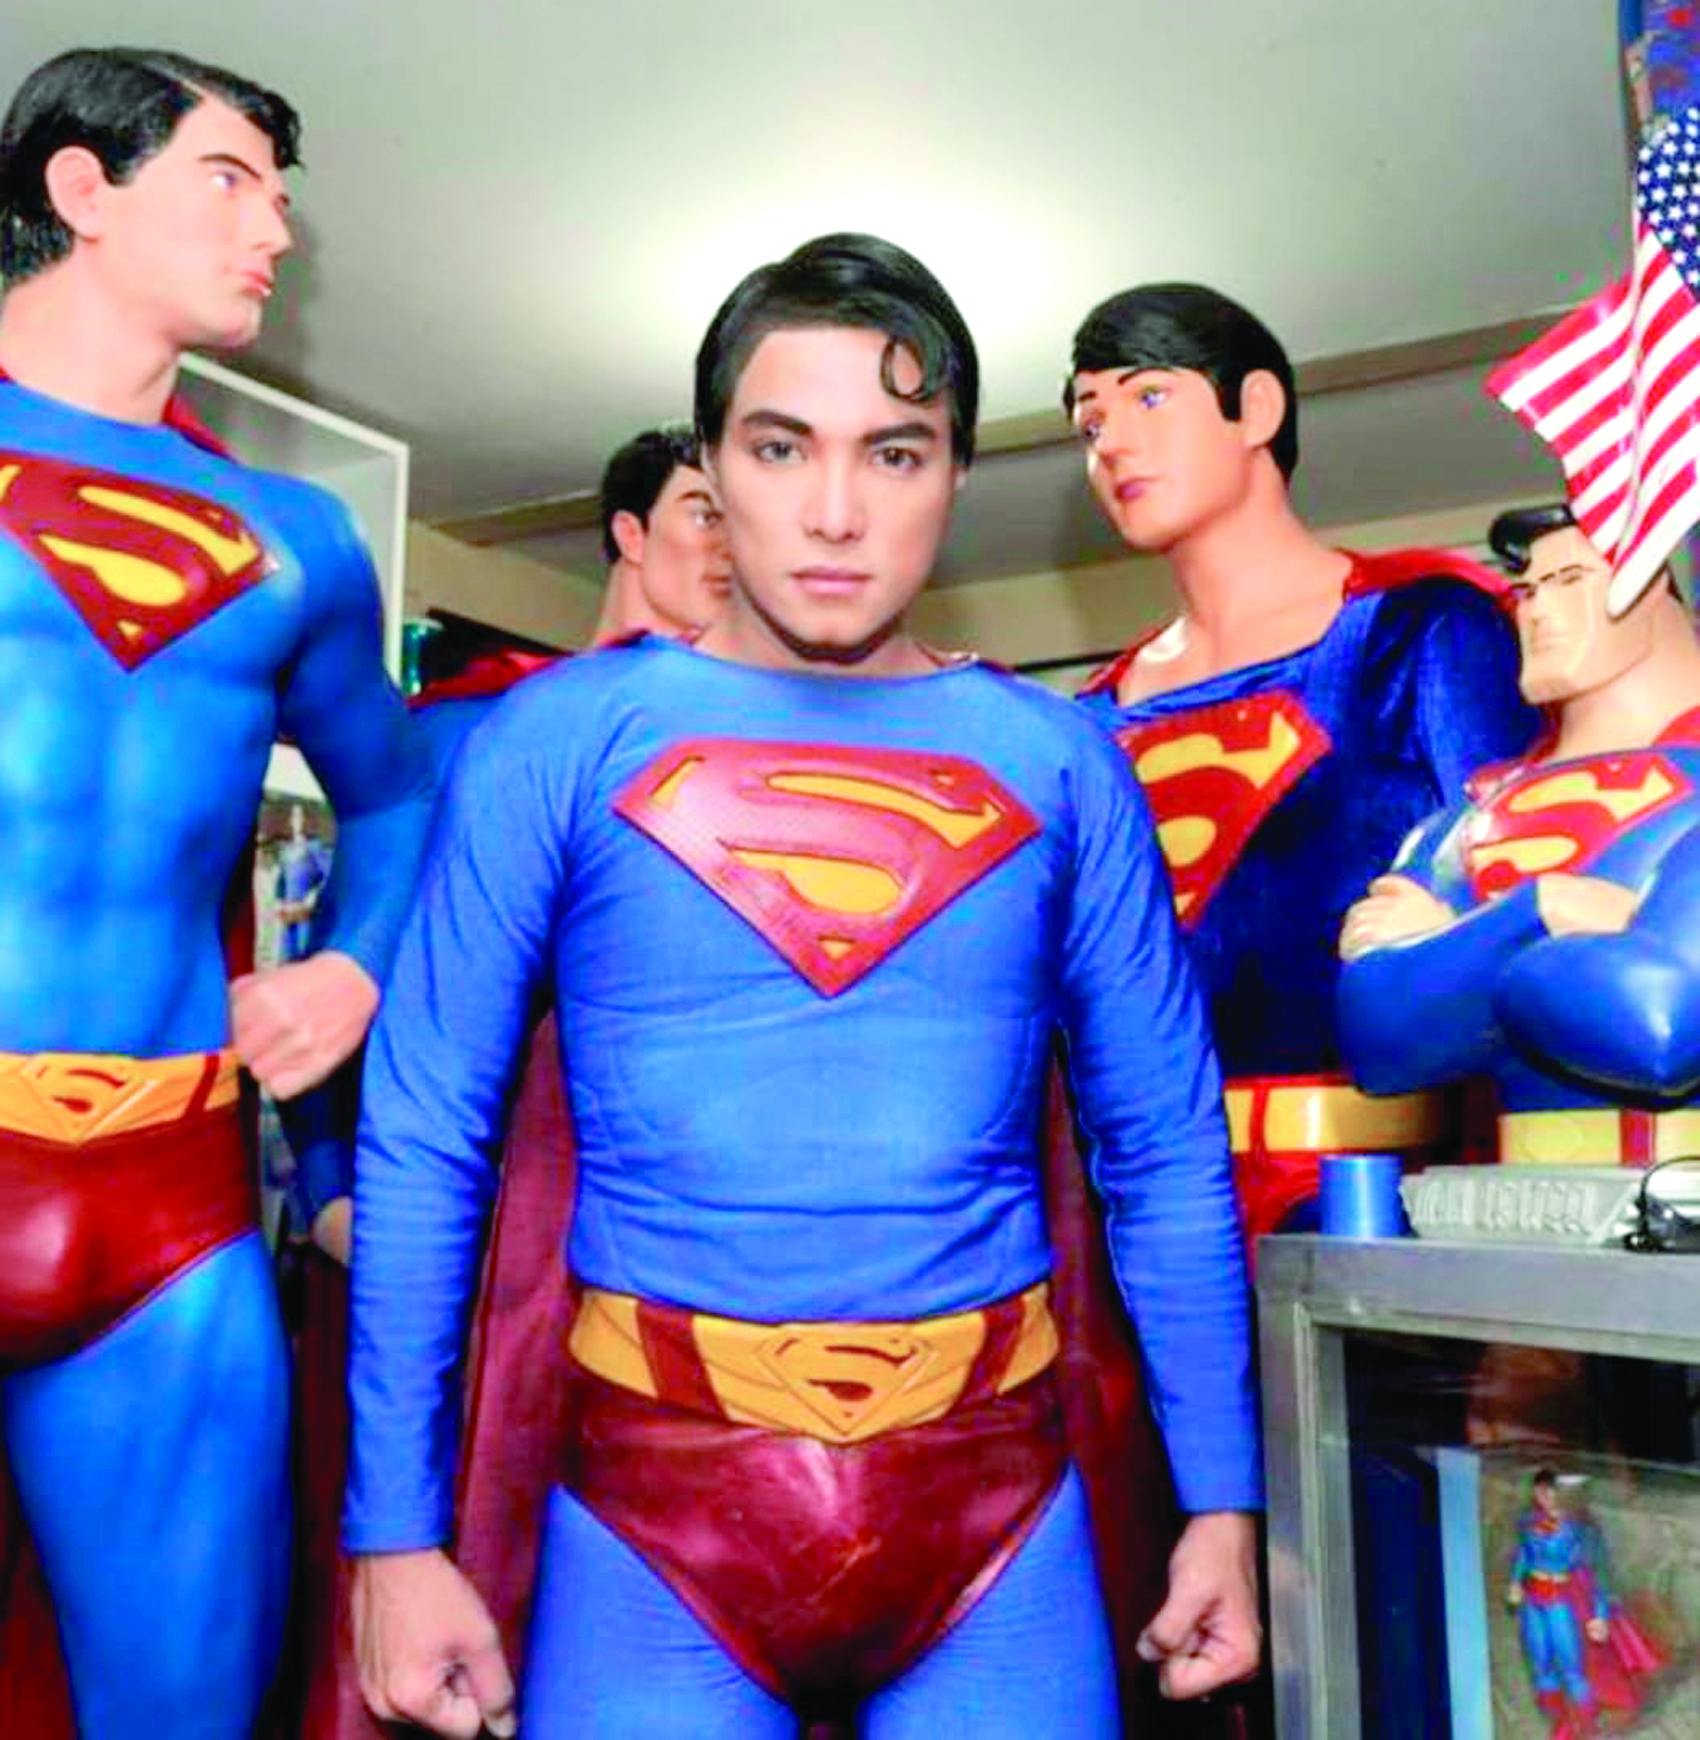 Herbert Chávez, 46, underwent a total of 26 painful operations to look like Superman.